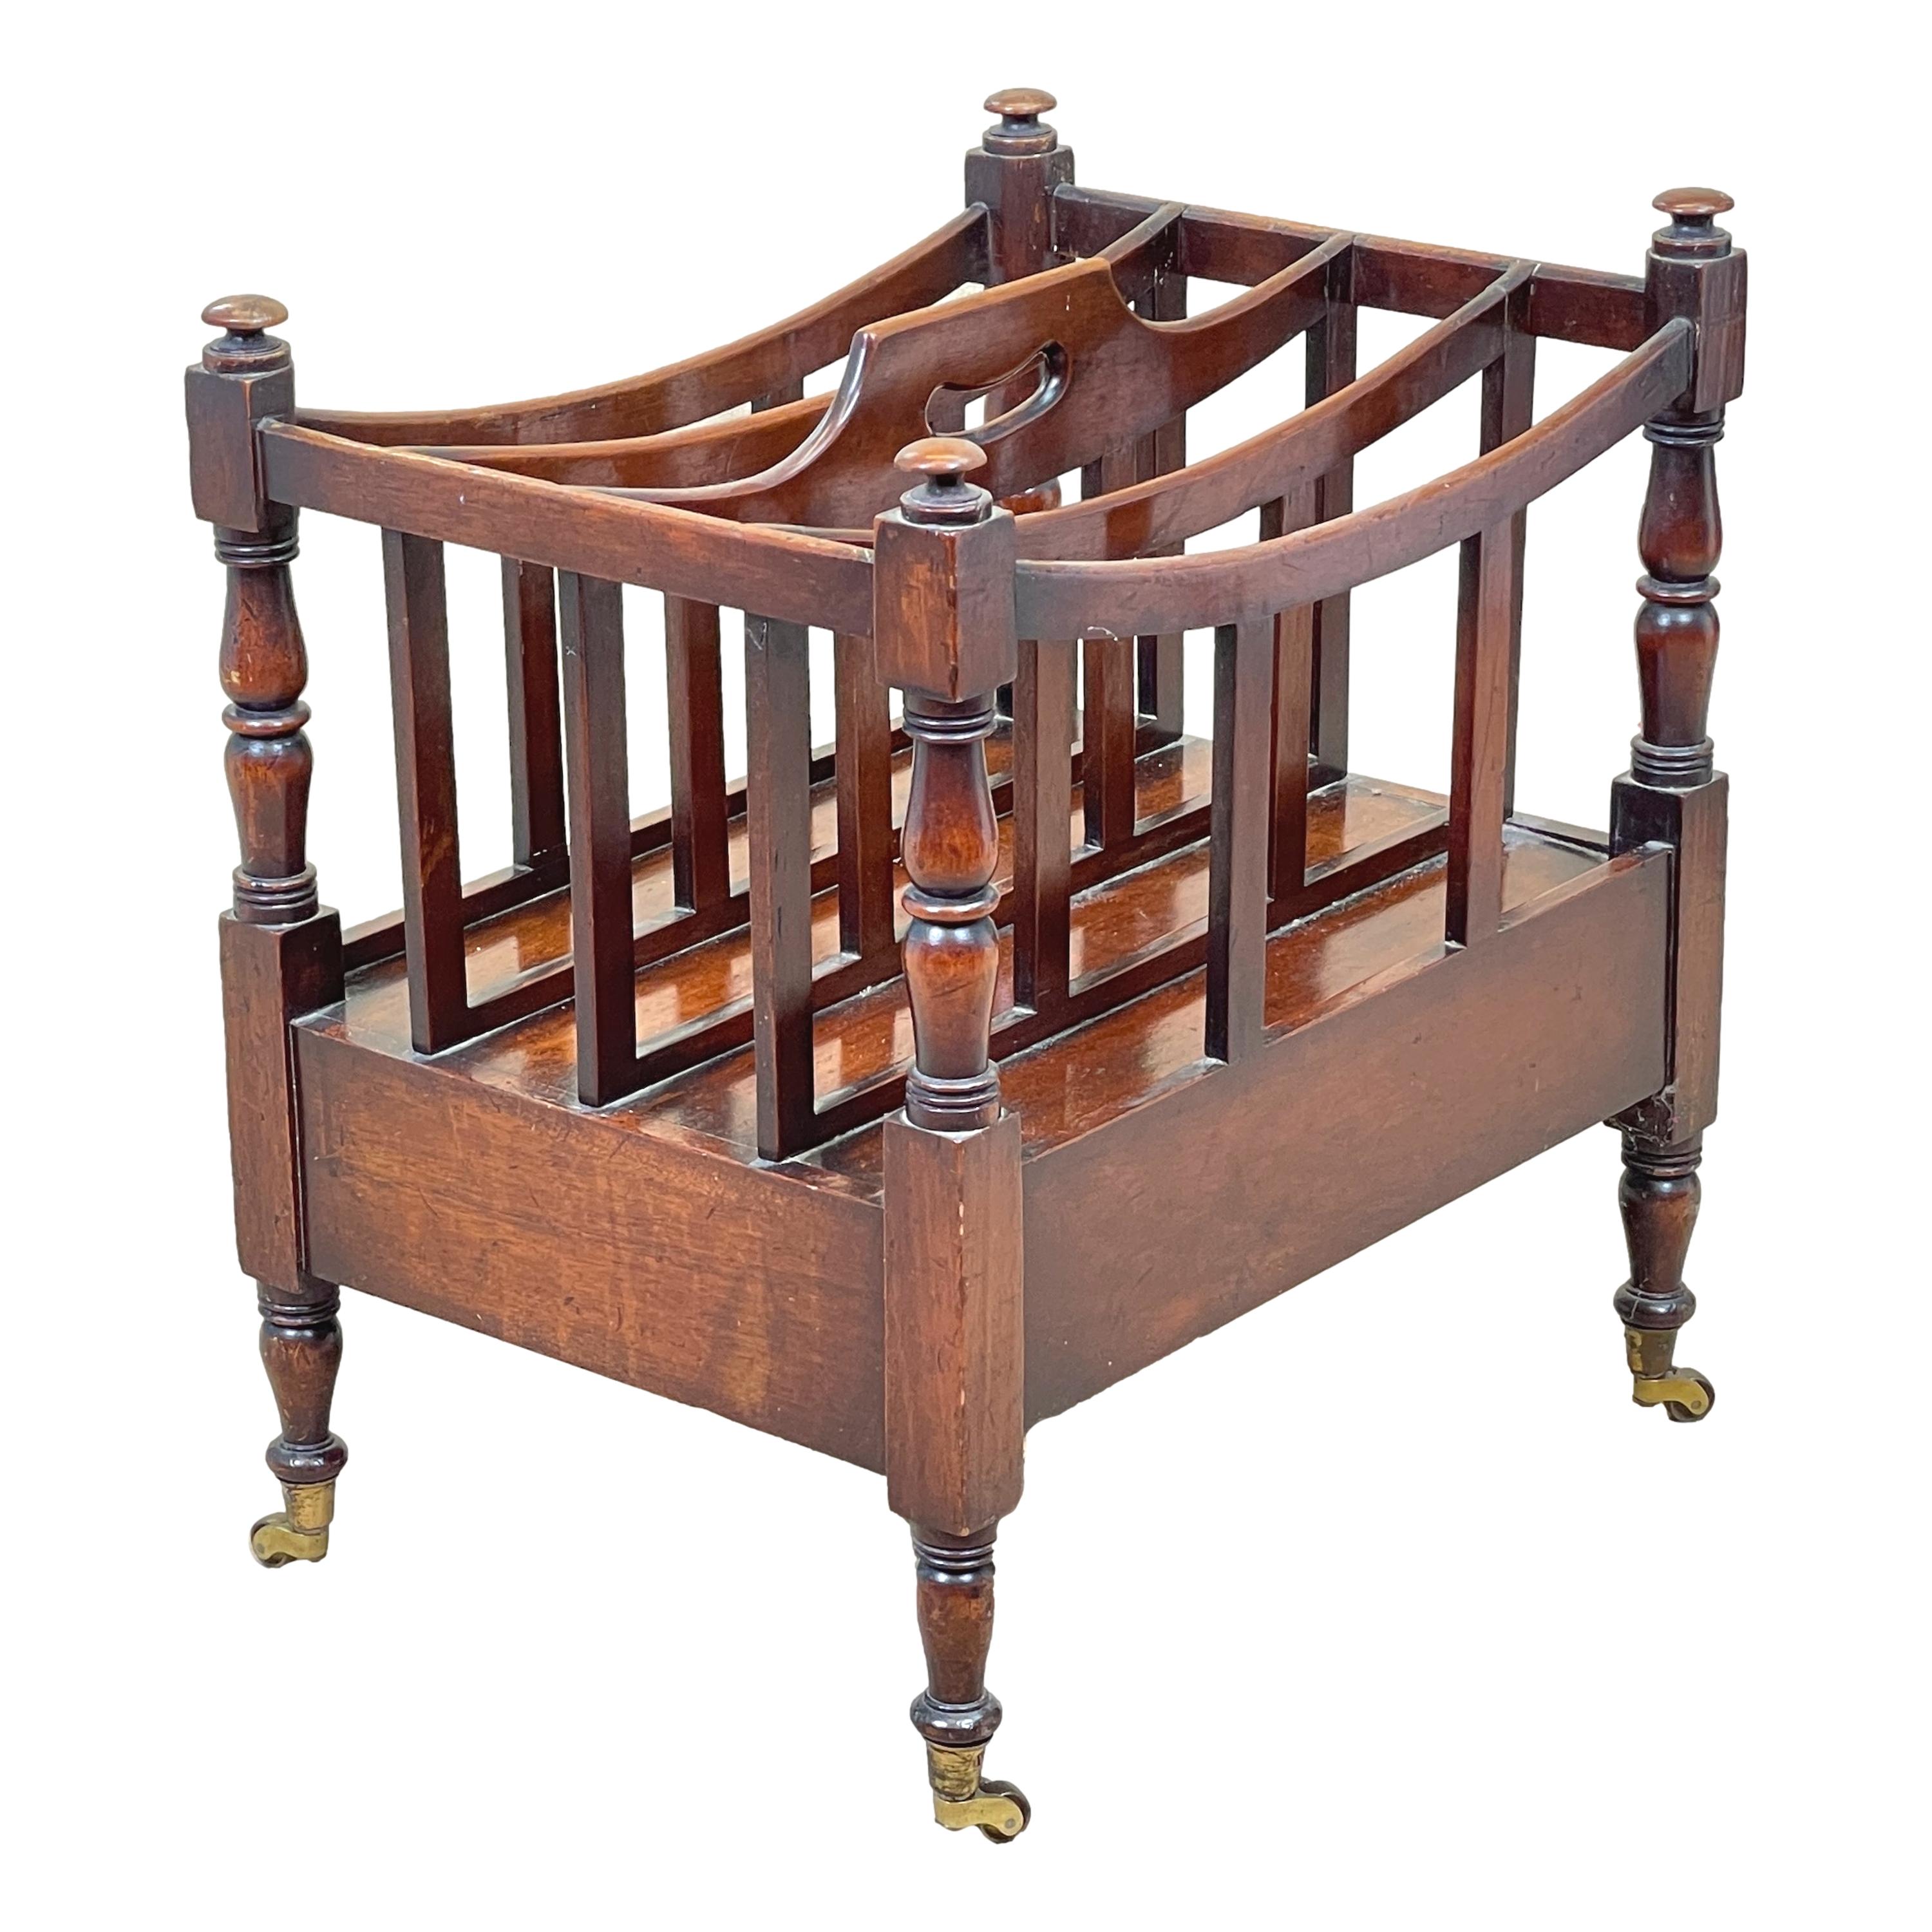 A very good quality early 19th century Regency period mahogany boat shaped canterbury with pierced carrying handle over four divisions and elegant turned upright supports, having one drawer to frieze with replacement brass knob, raised on elegant